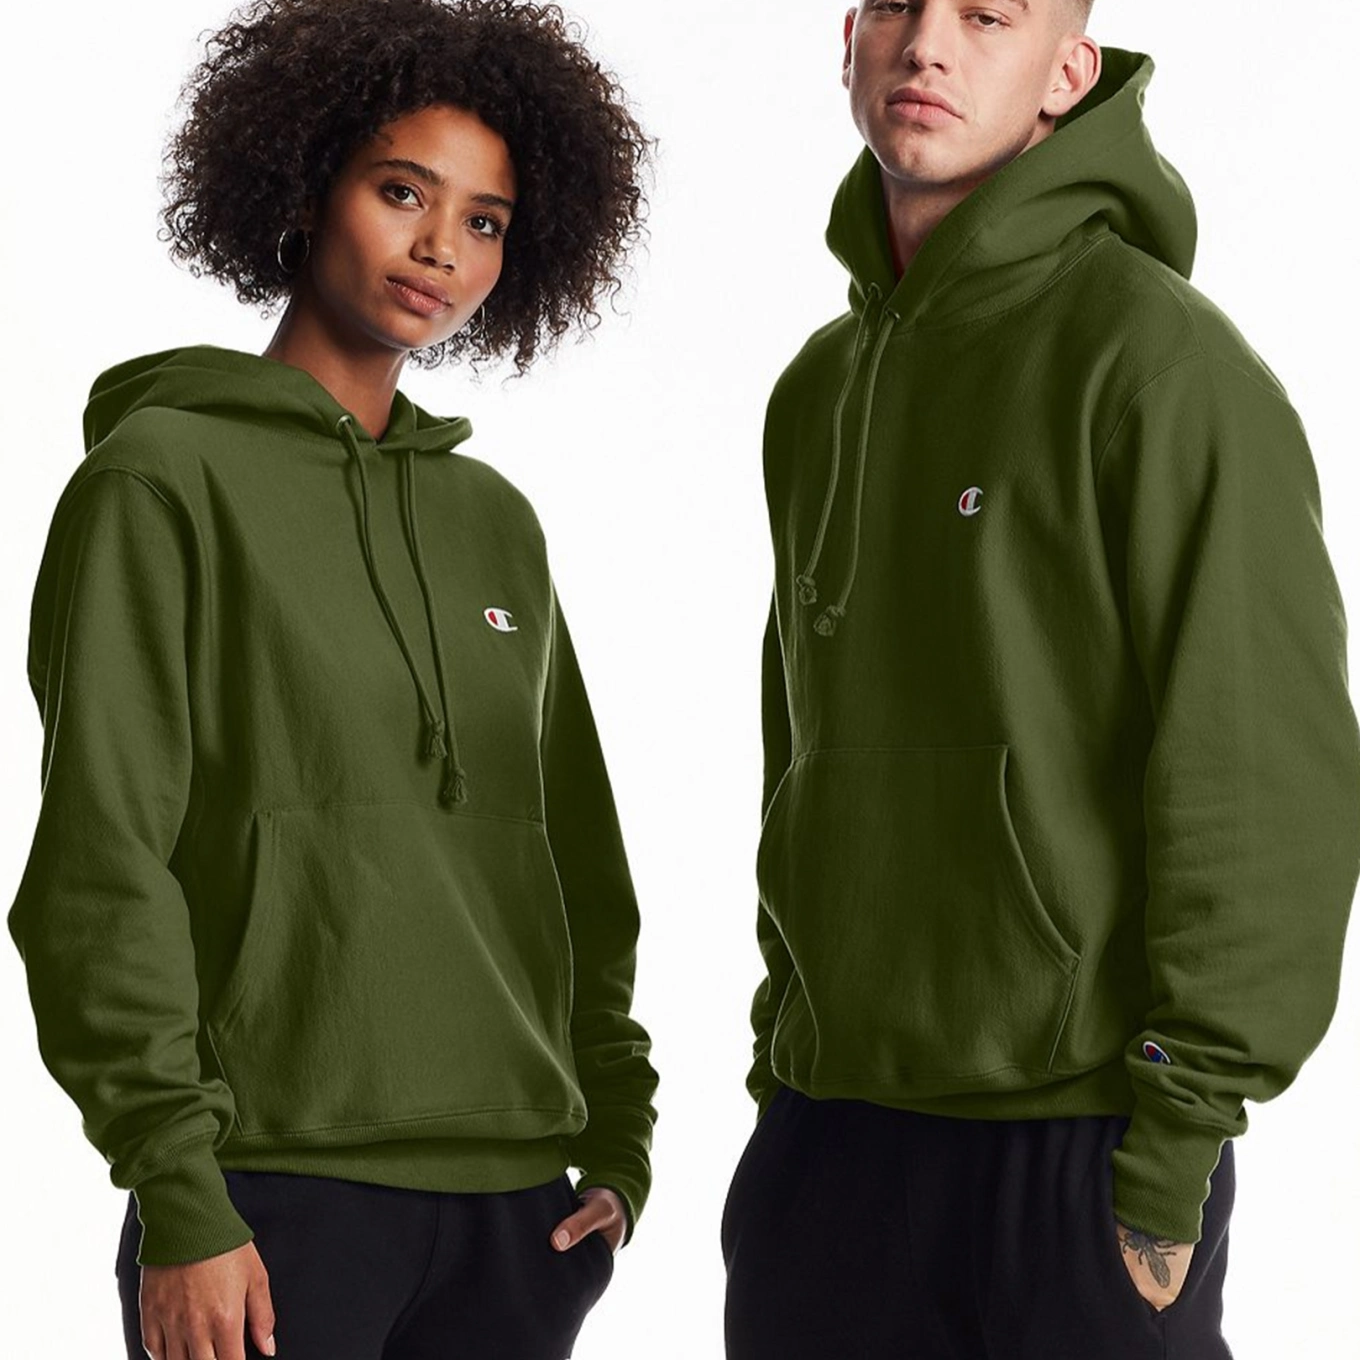 Where to Look for Contemplations for Your Own Custom Hoodie